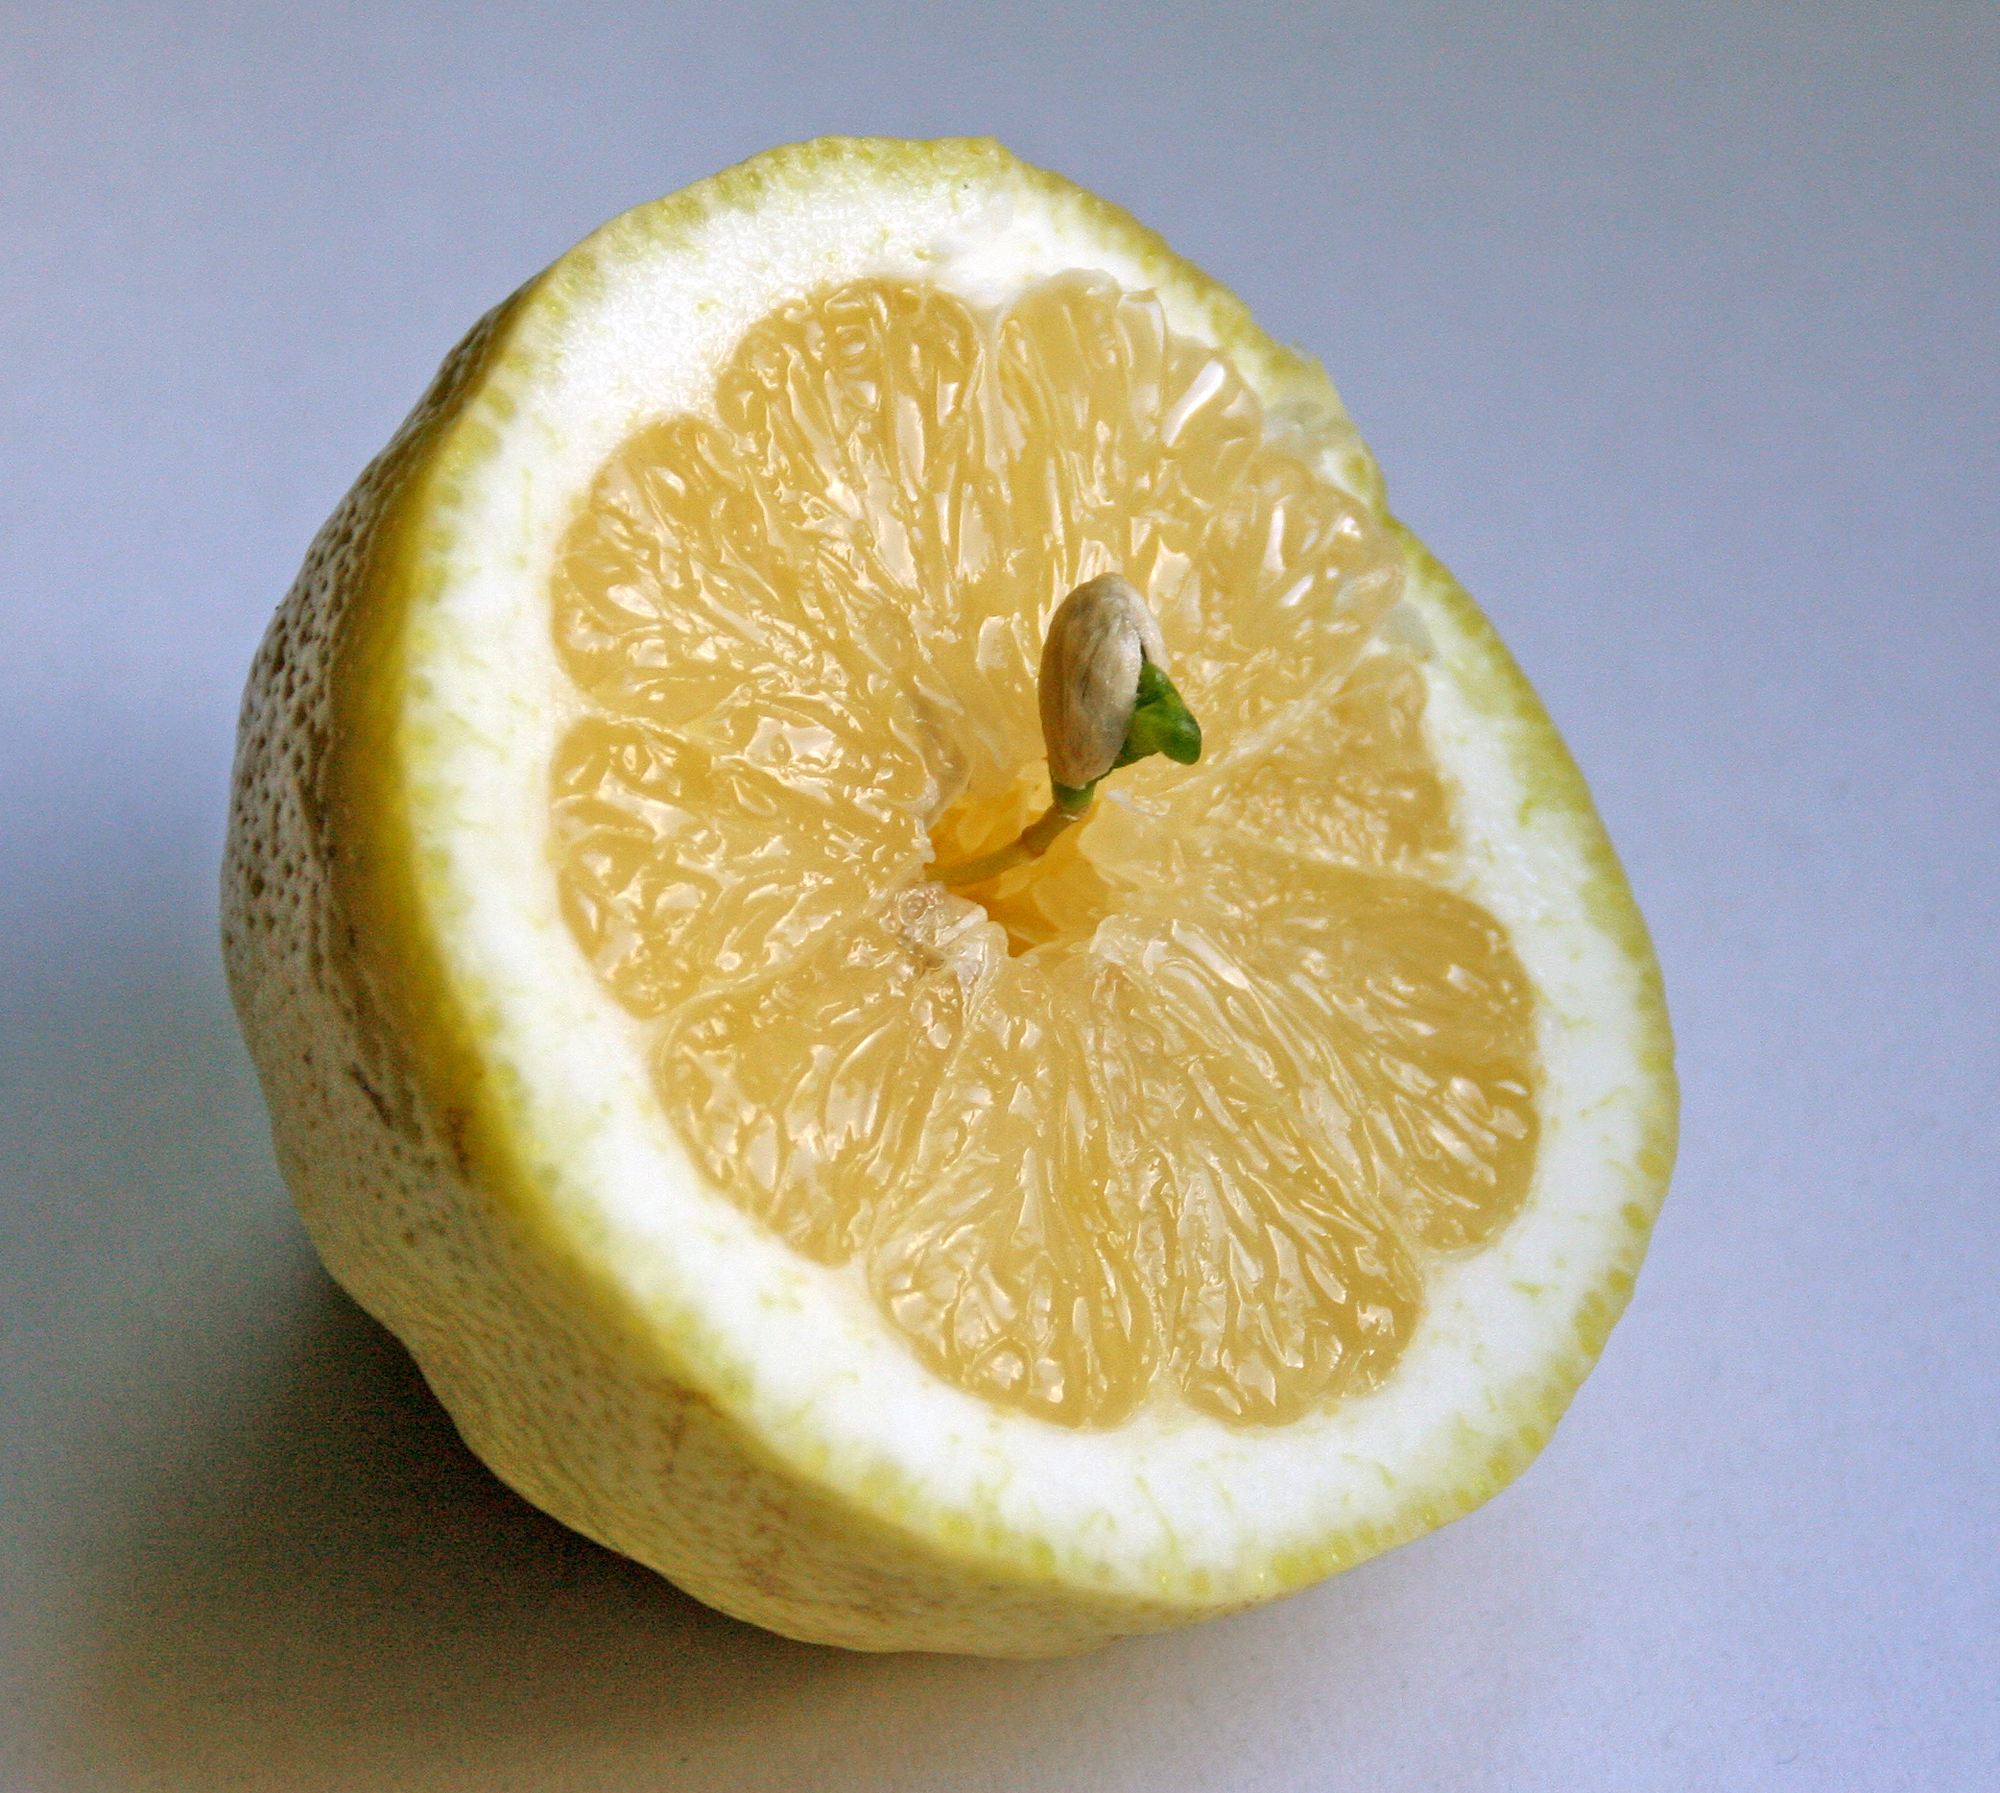 Lemon with sprout inside